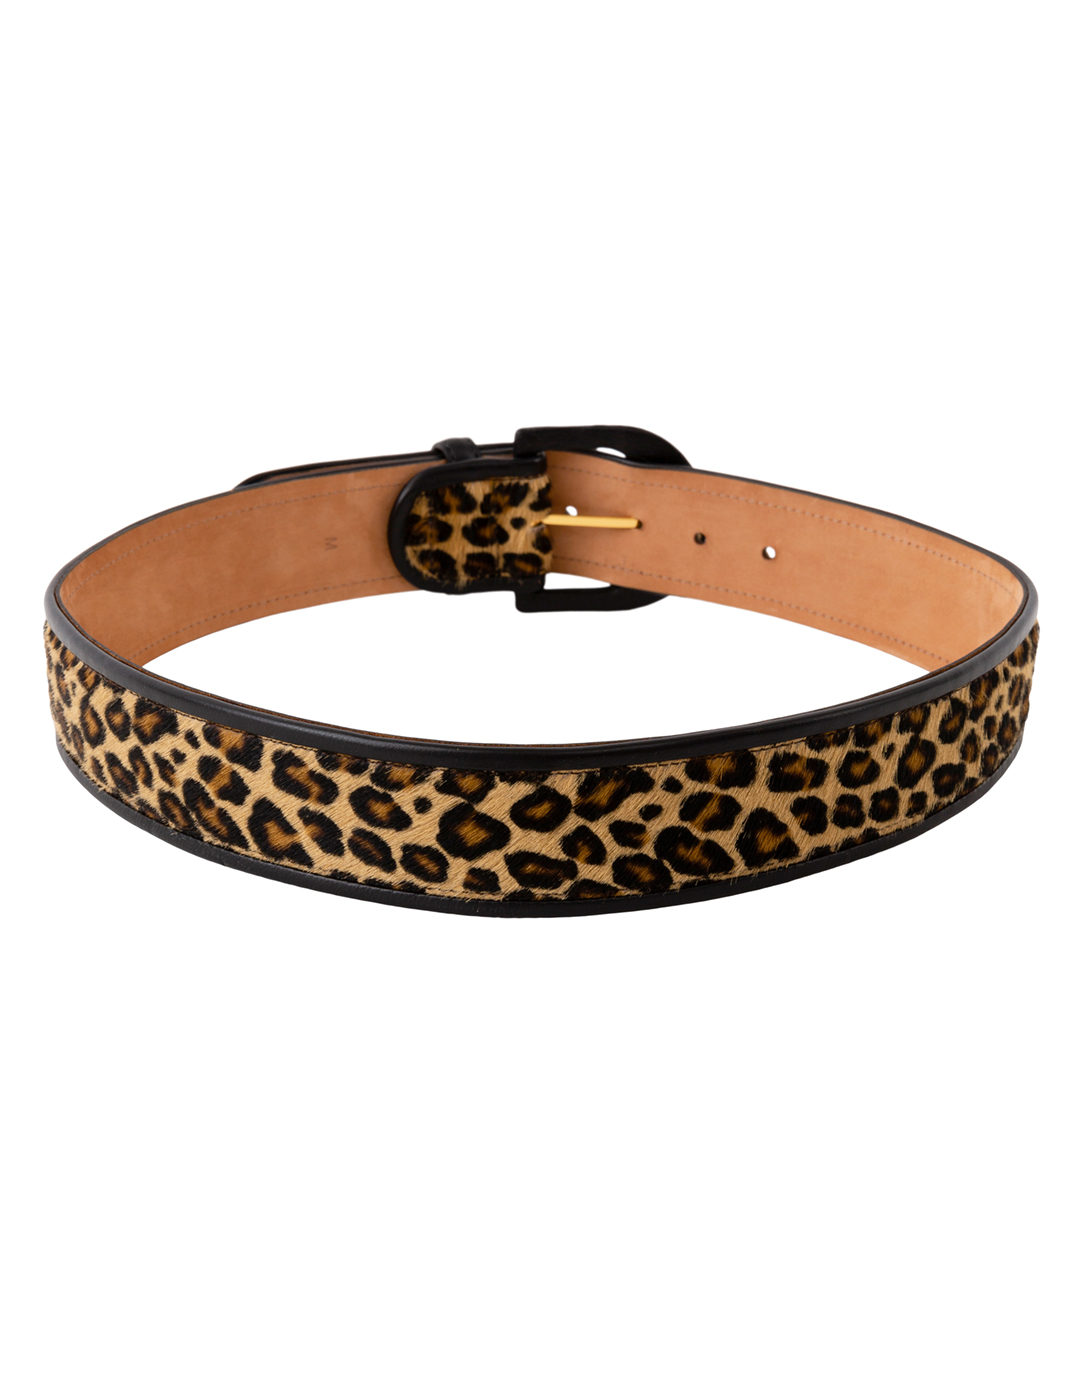 Leopard Calf Hair Belt with Black Leather Piping | W. Kleinberg | Halsbrook